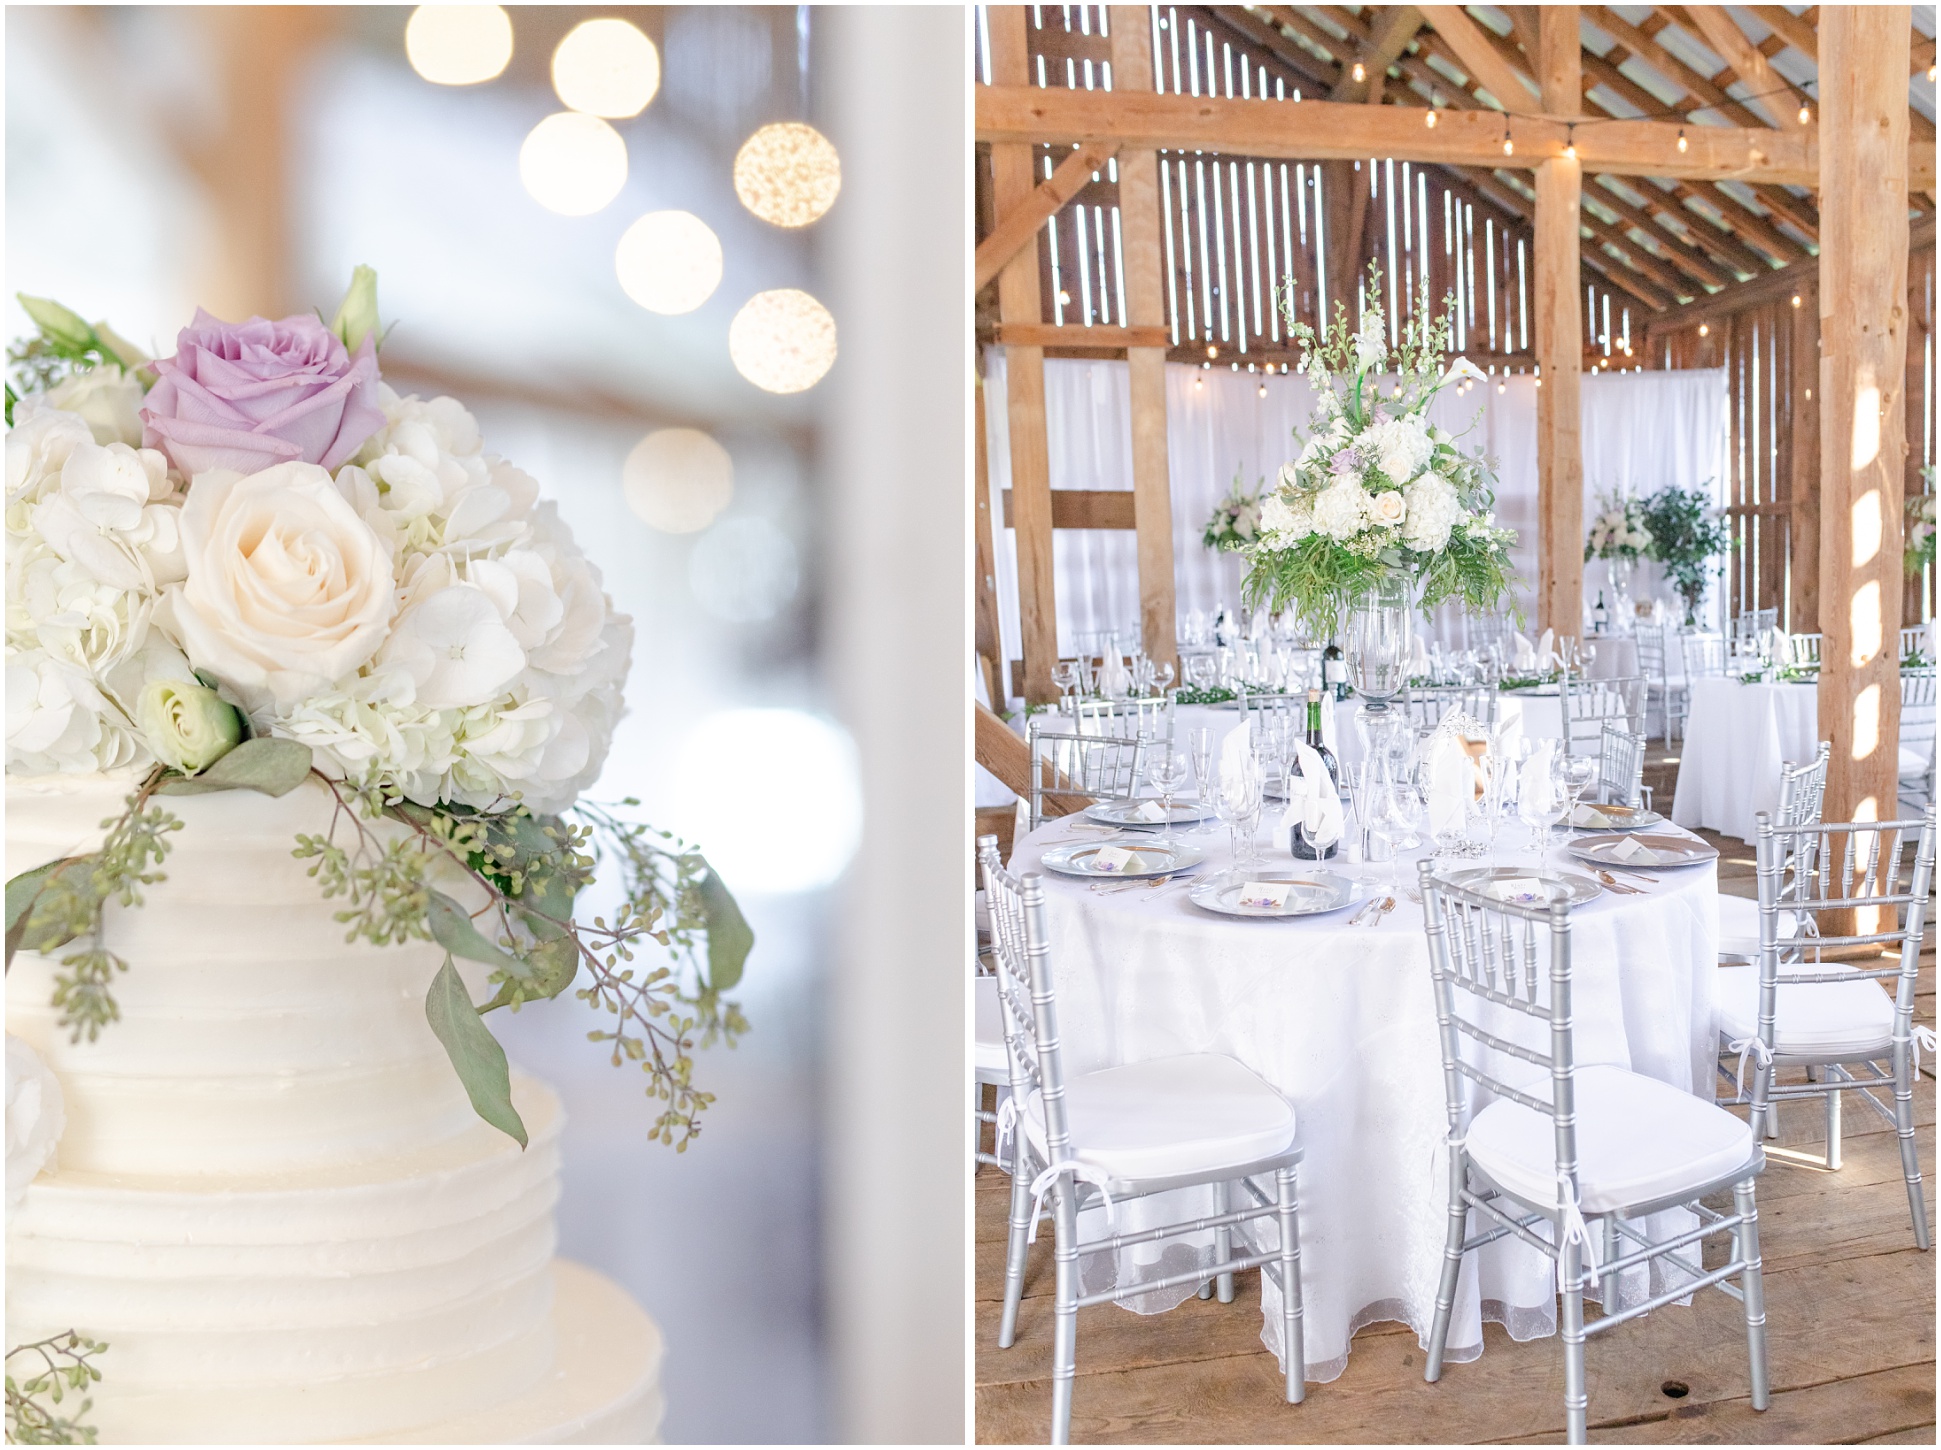 Left: Cake, Right: Reception tables in the barn